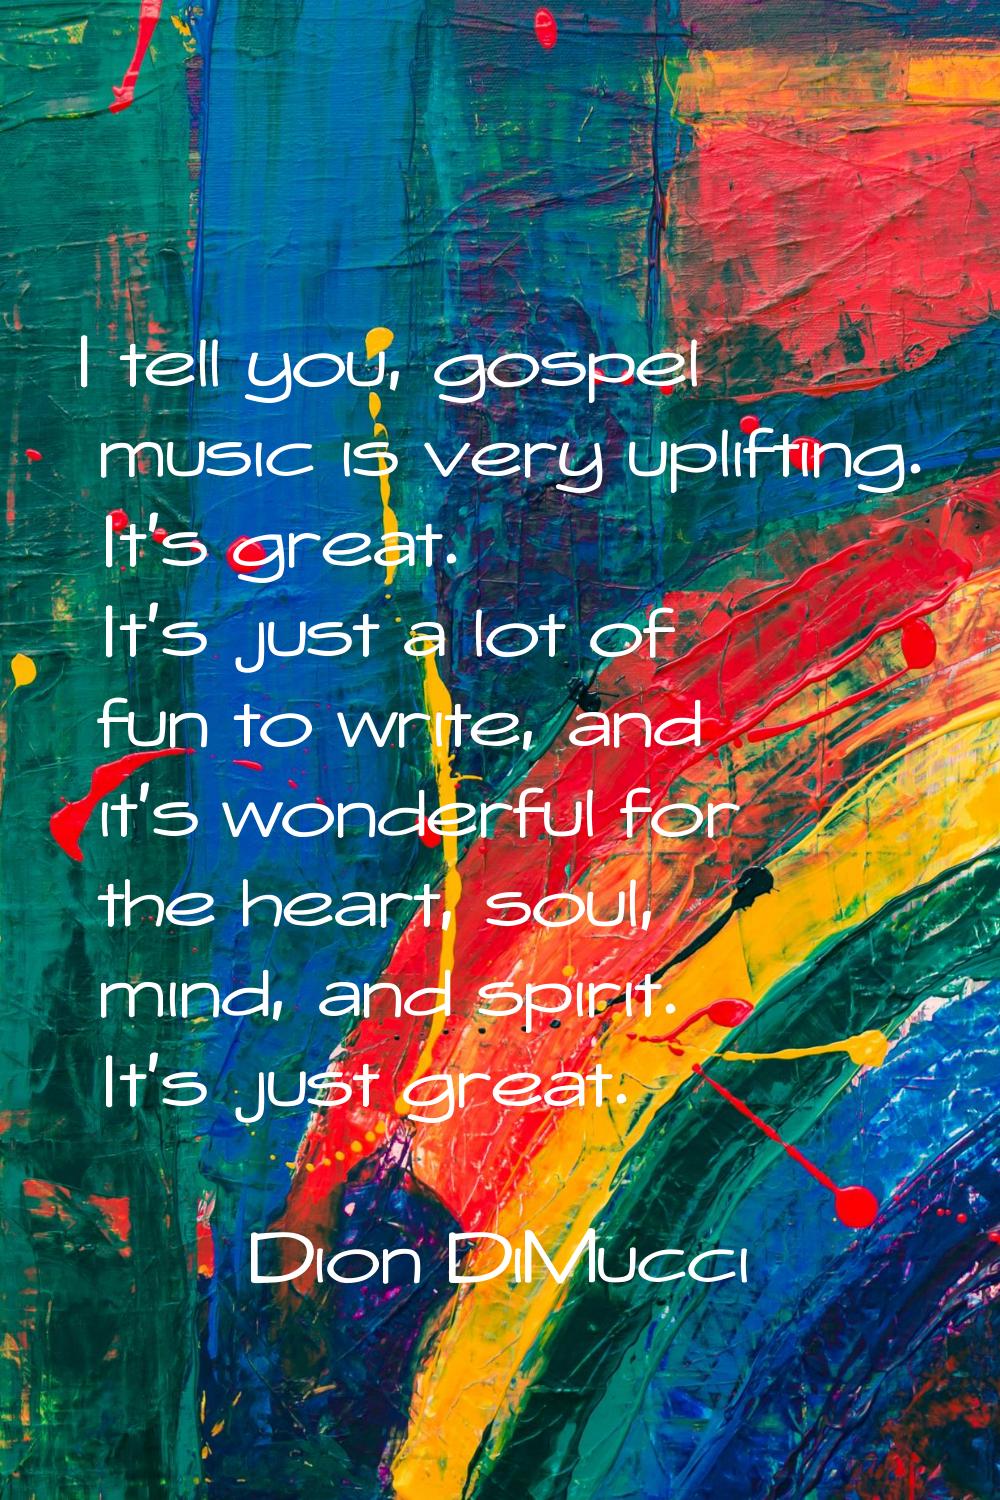 I tell you, gospel music is very uplifting. It's great. It's just a lot of fun to write, and it's w